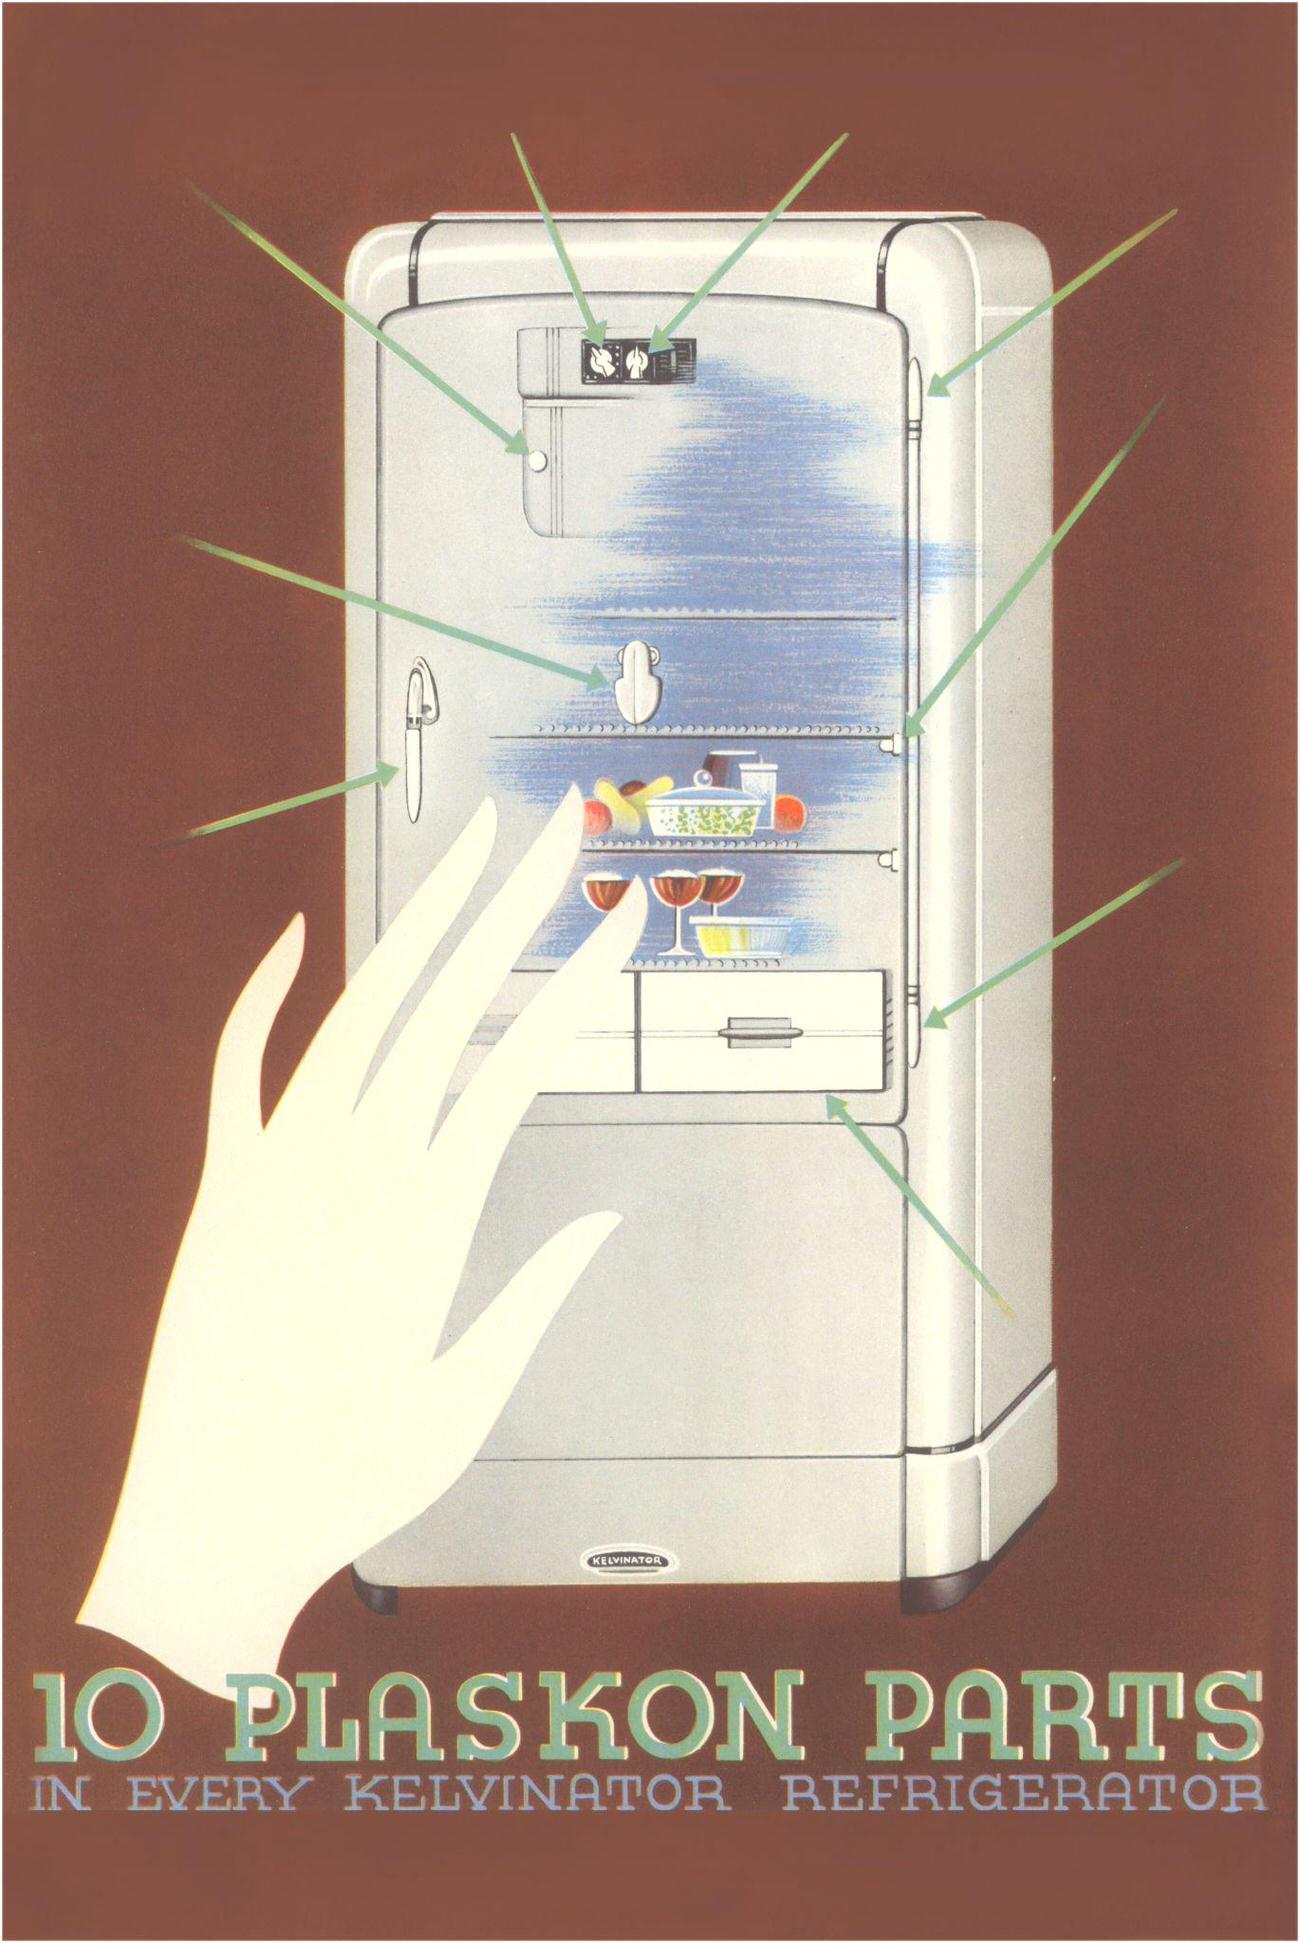 Refrigerator Features ad.